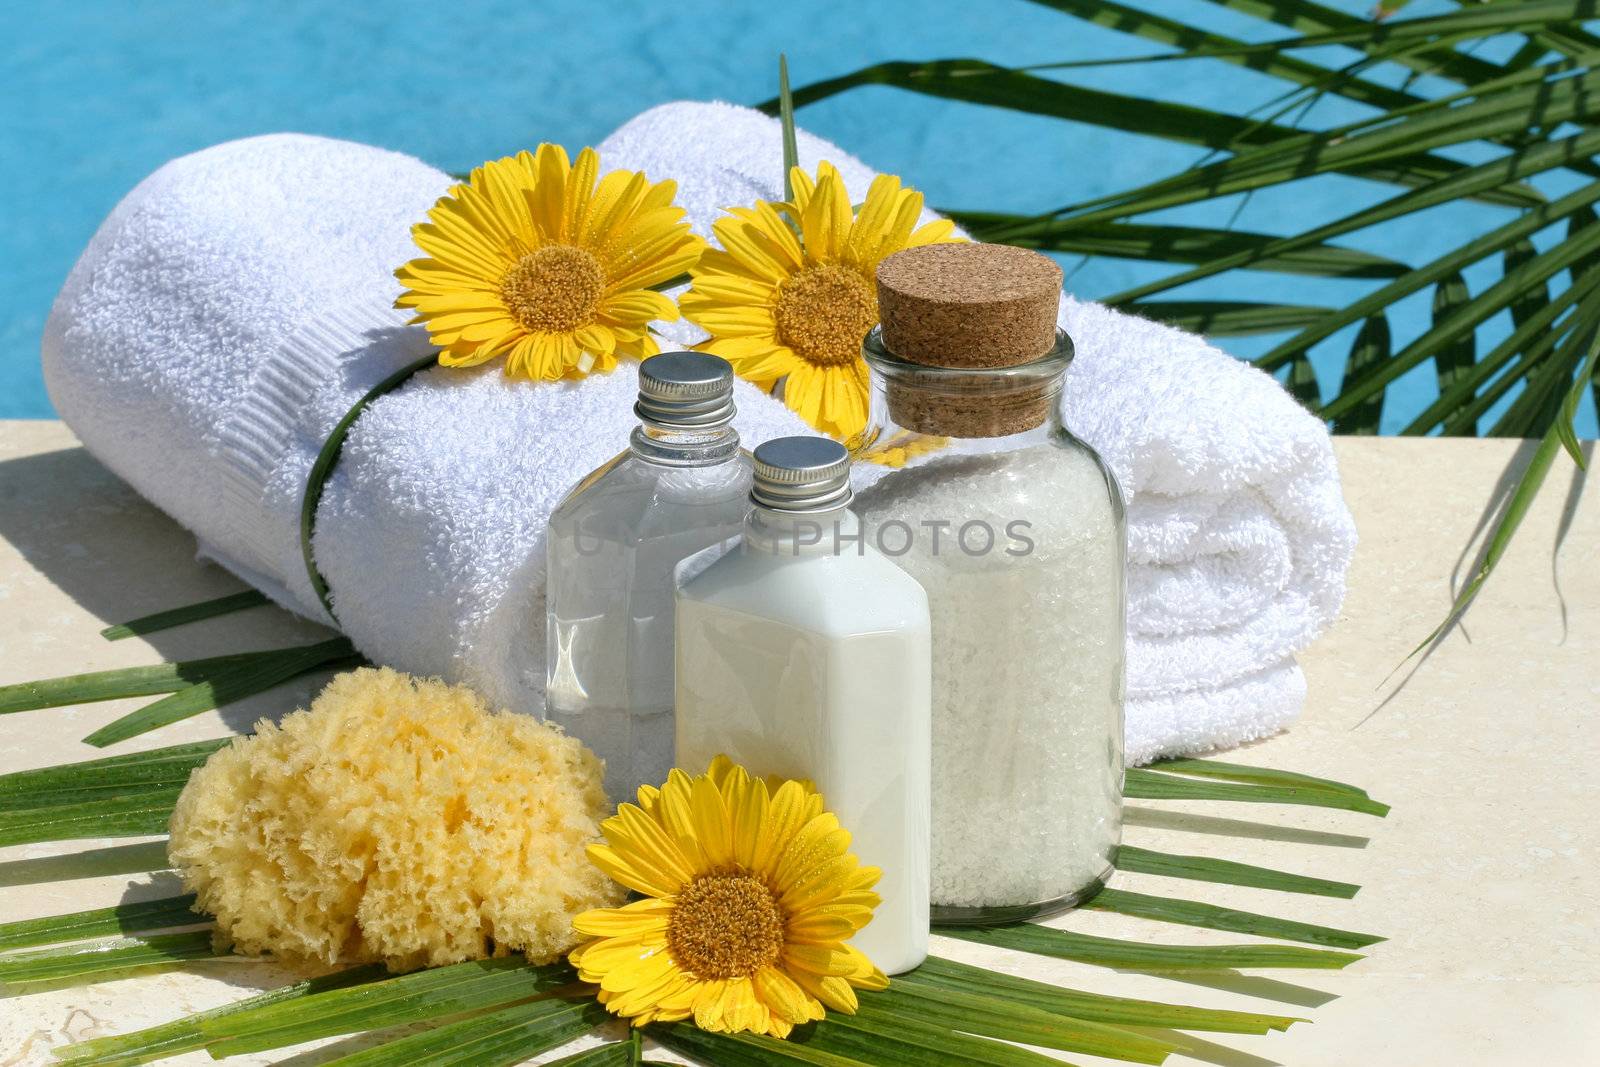 Spa products and white towels by the pool